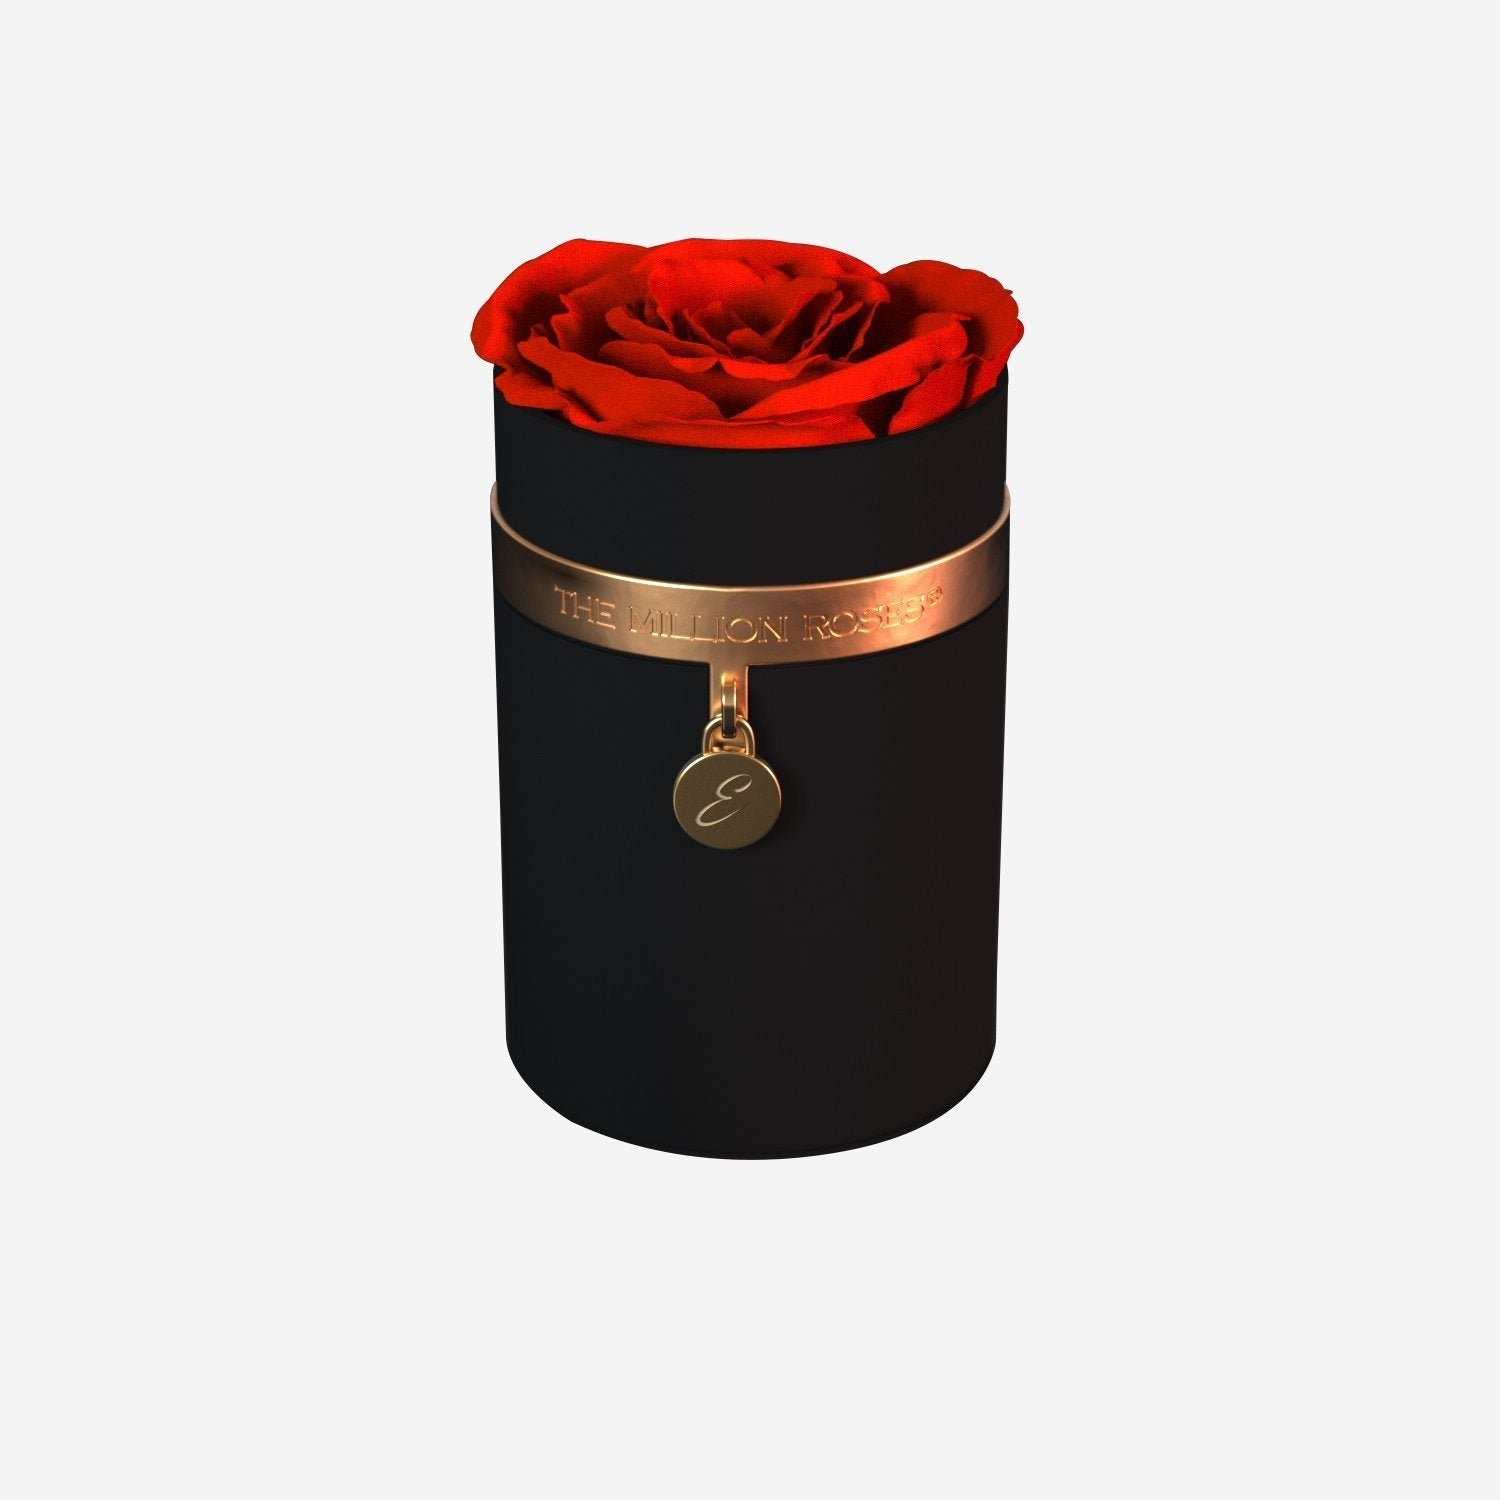 One in a Million™ Round Black Box | Charm Edition | Red Rose - The Million Roses